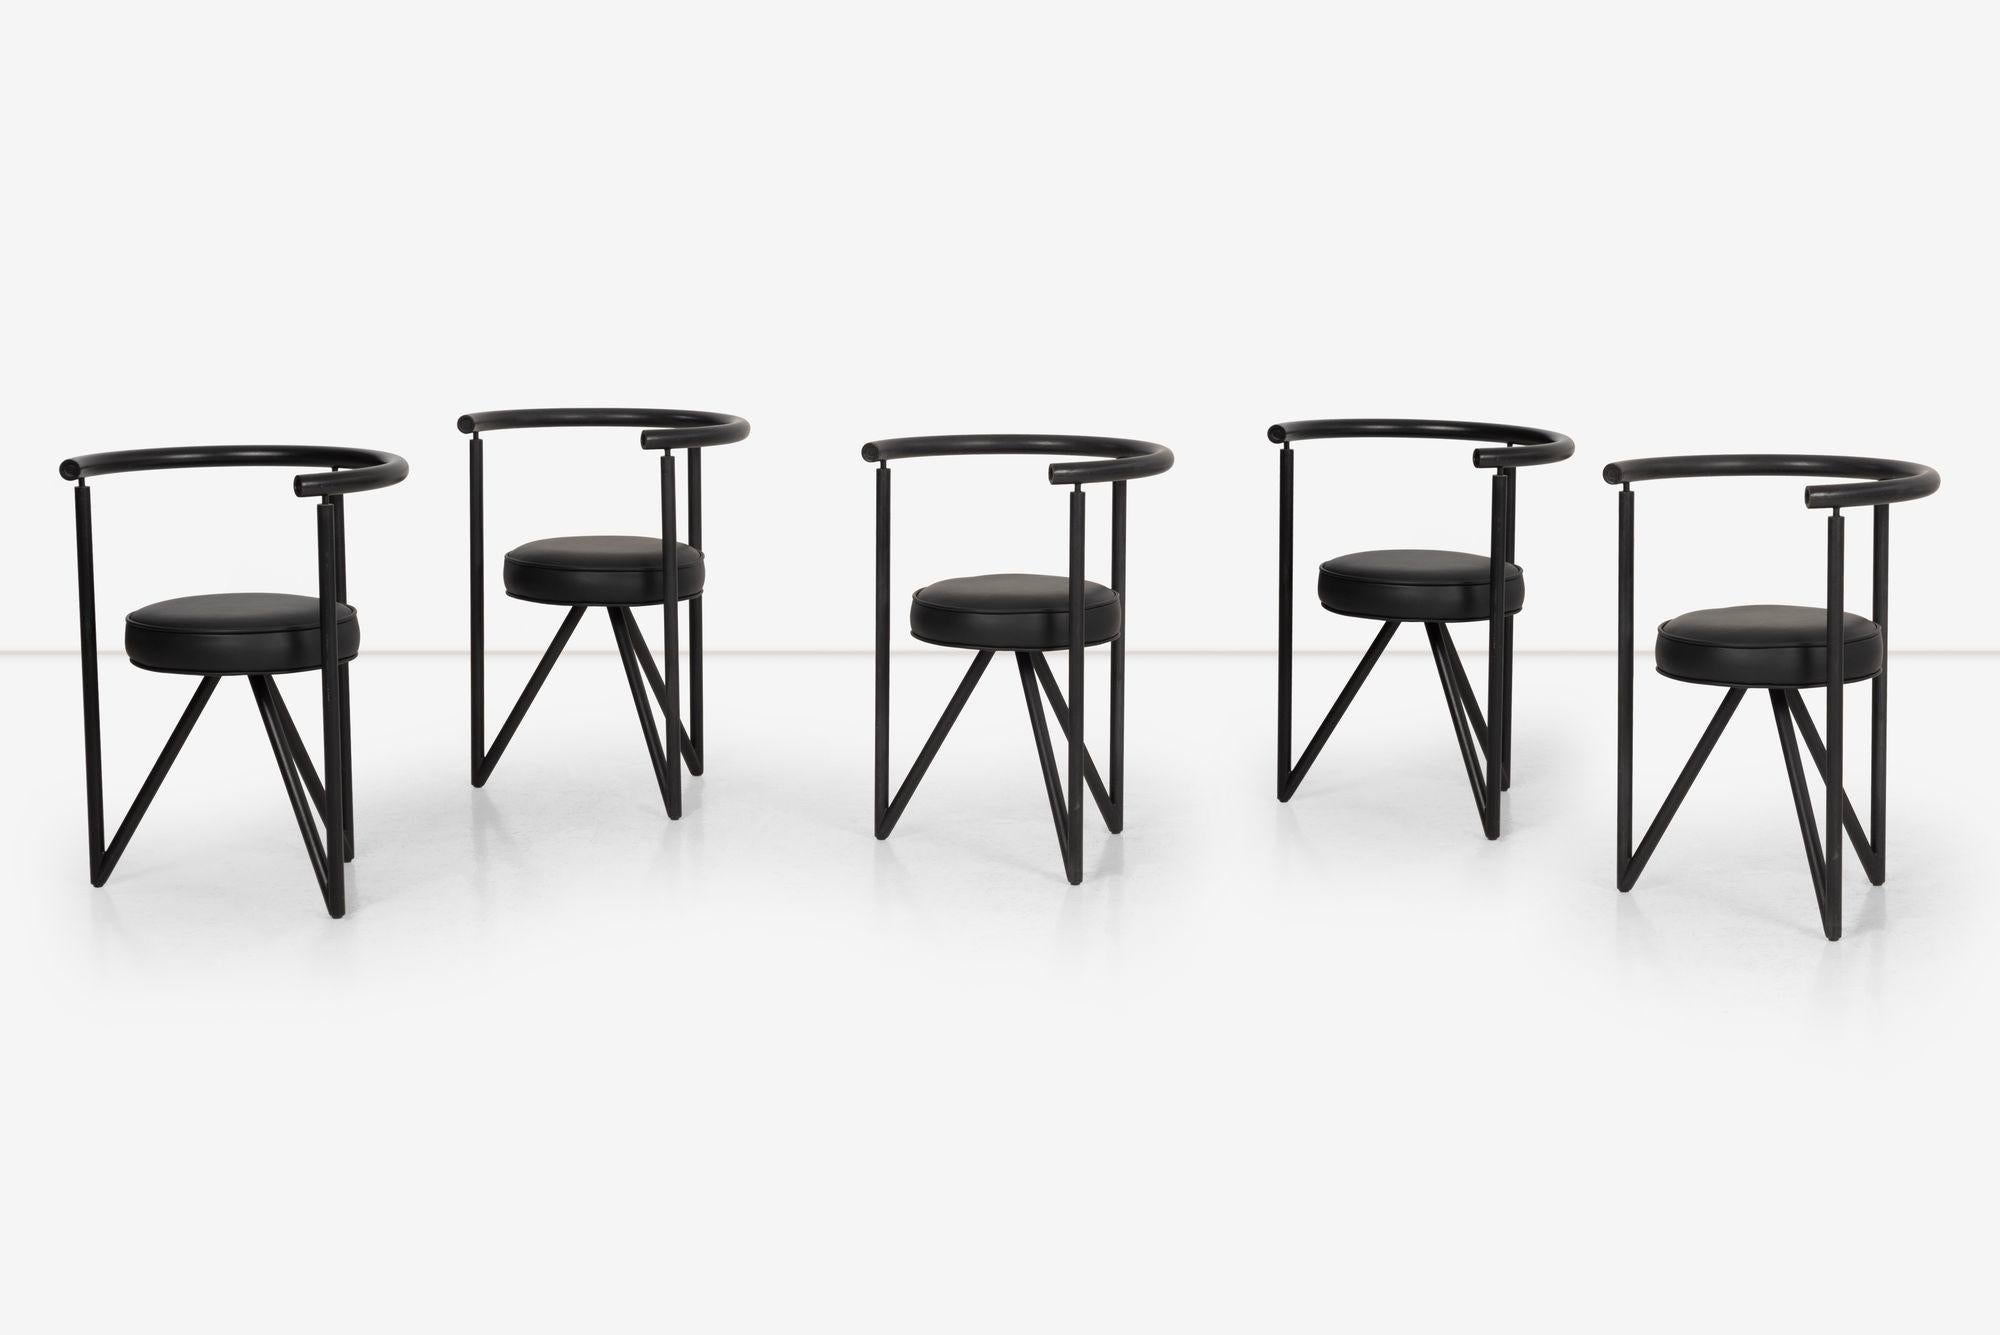 Spanish Philippe Starck Miss Dorn Chairs, set of Five by Disform, Spain 1982